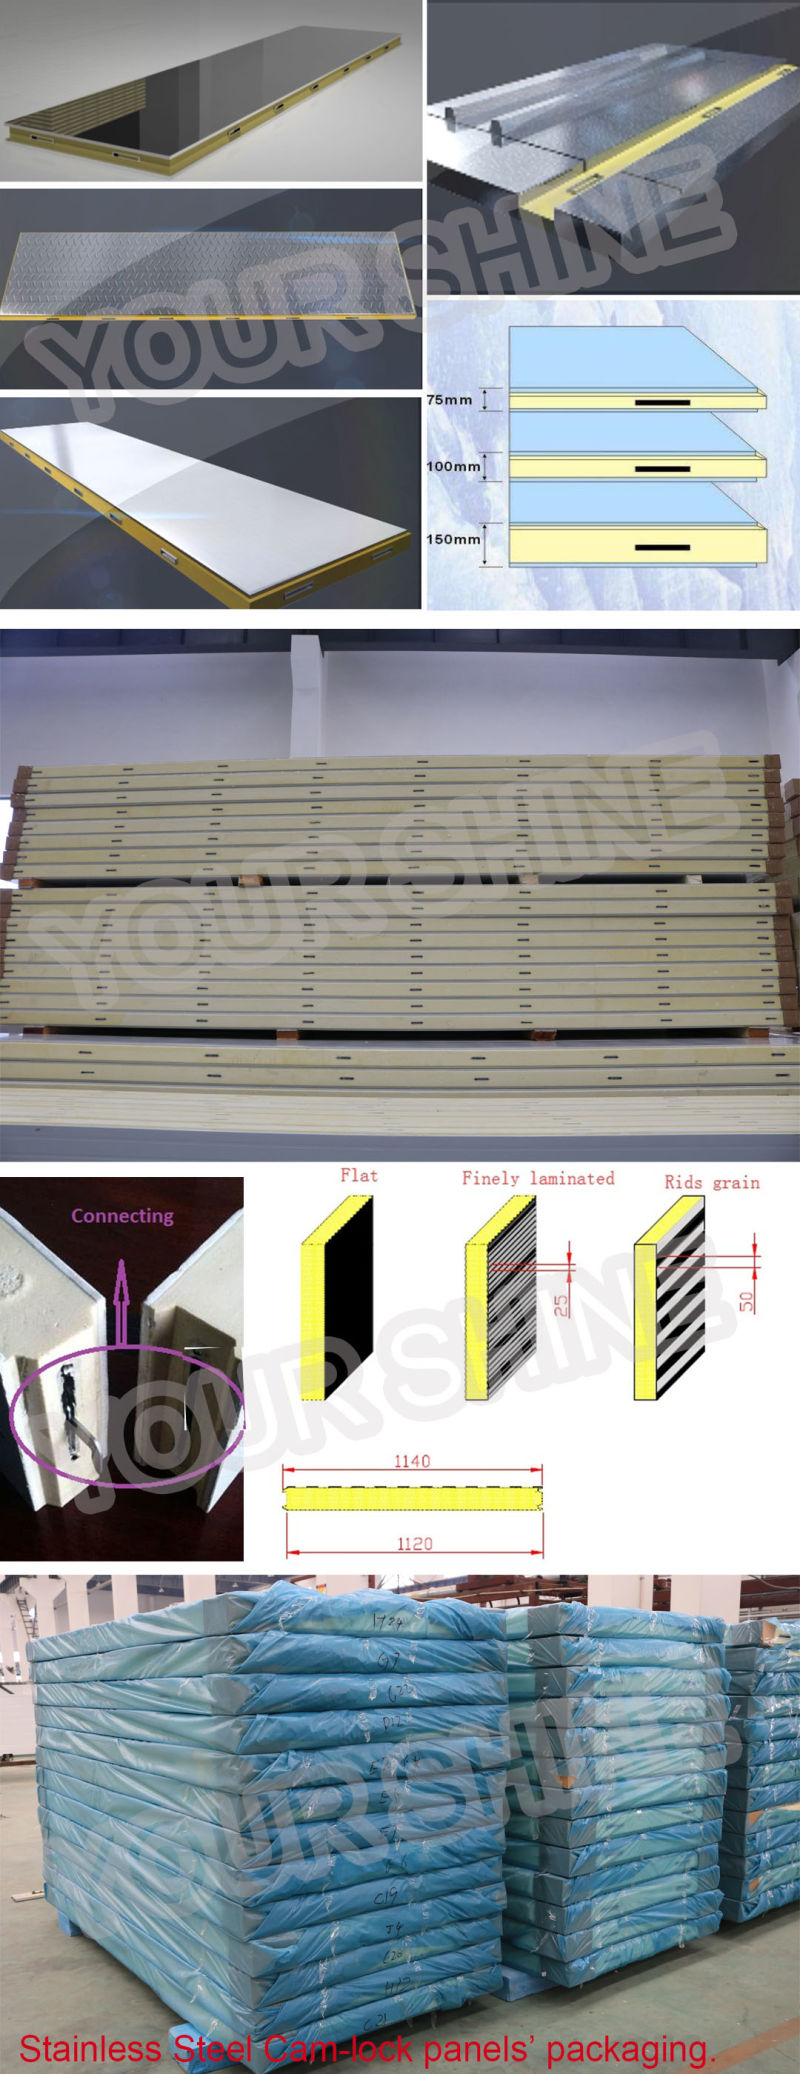 Superior Insulated Heat Reflective Material PU Panel Pipe Insulation Wall PU Panel for Steel Building